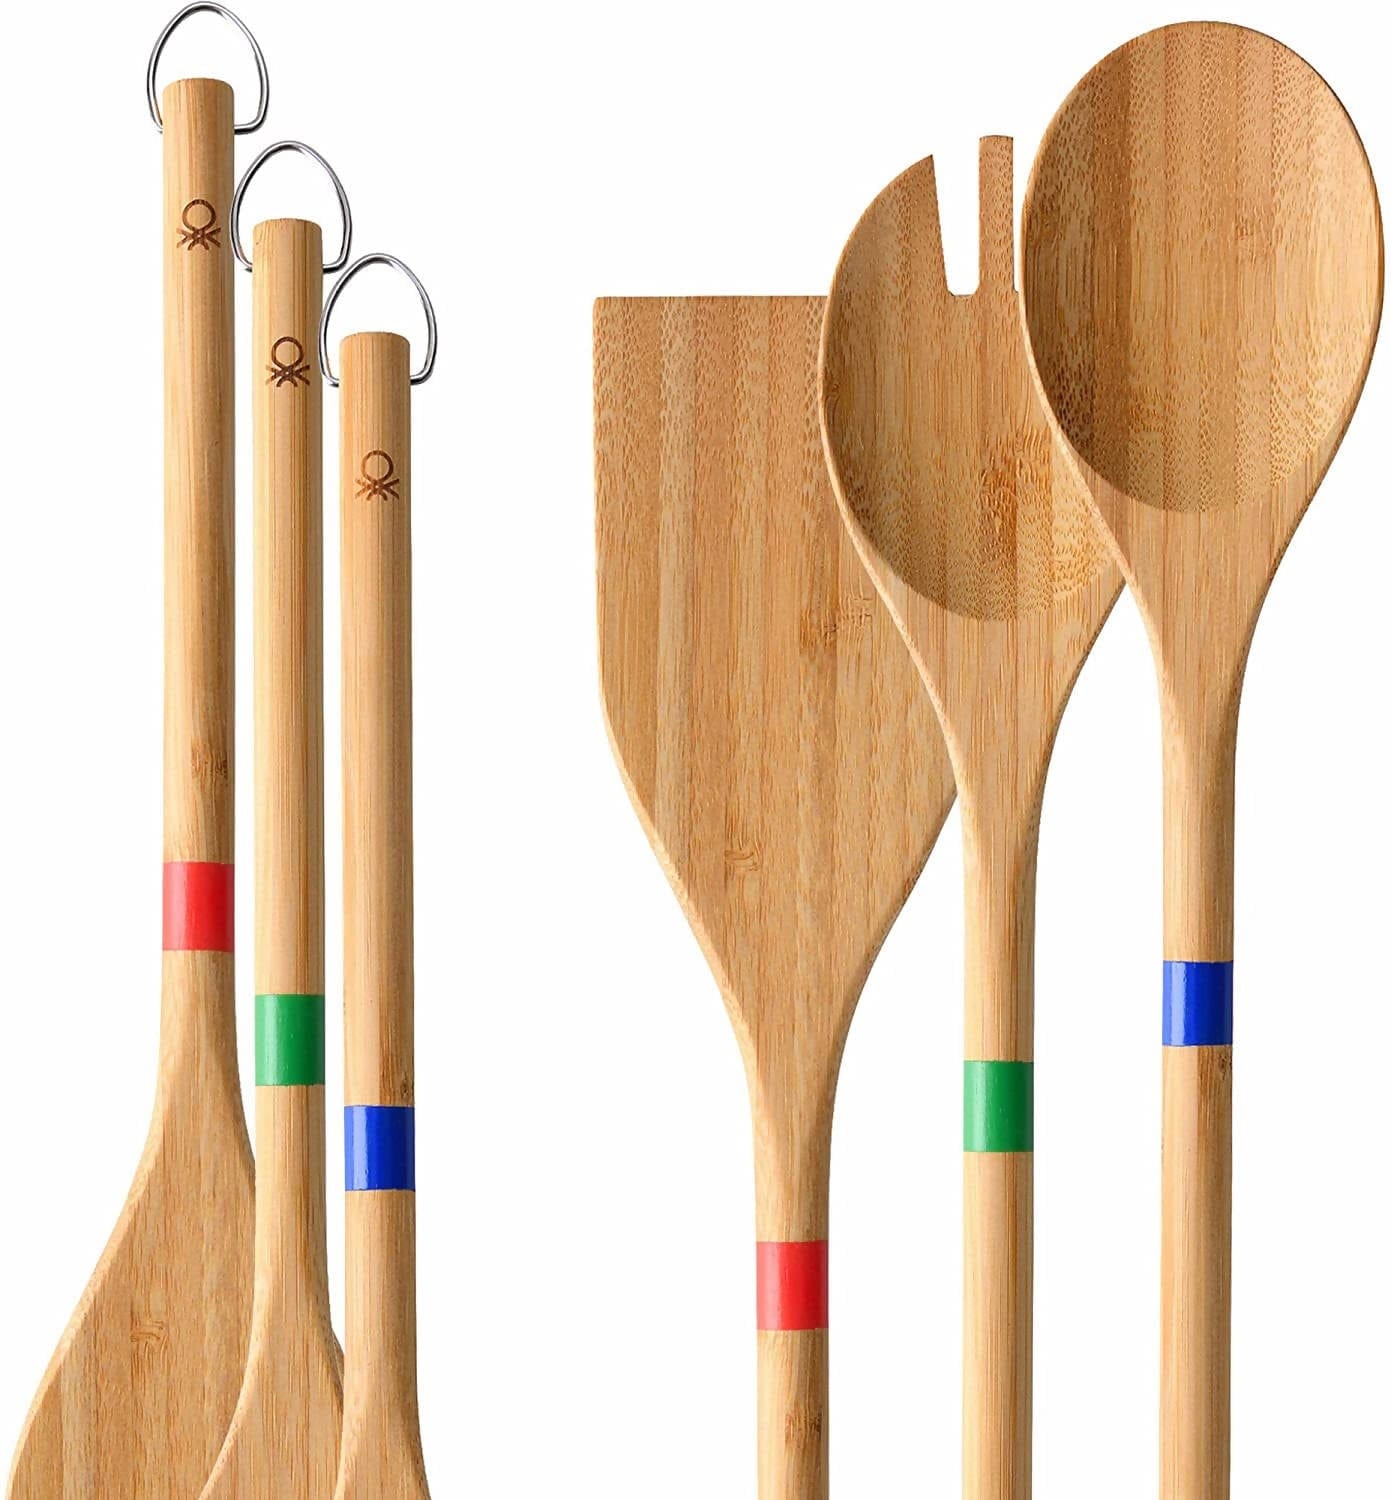 Bennetton Set of 3 Bamboo Kitchen Utensils can be used on any nonstick cookware and is ideal for stir-frying, sauteing, deep frying, steaming and parboiling, scooping rice and more - 0364